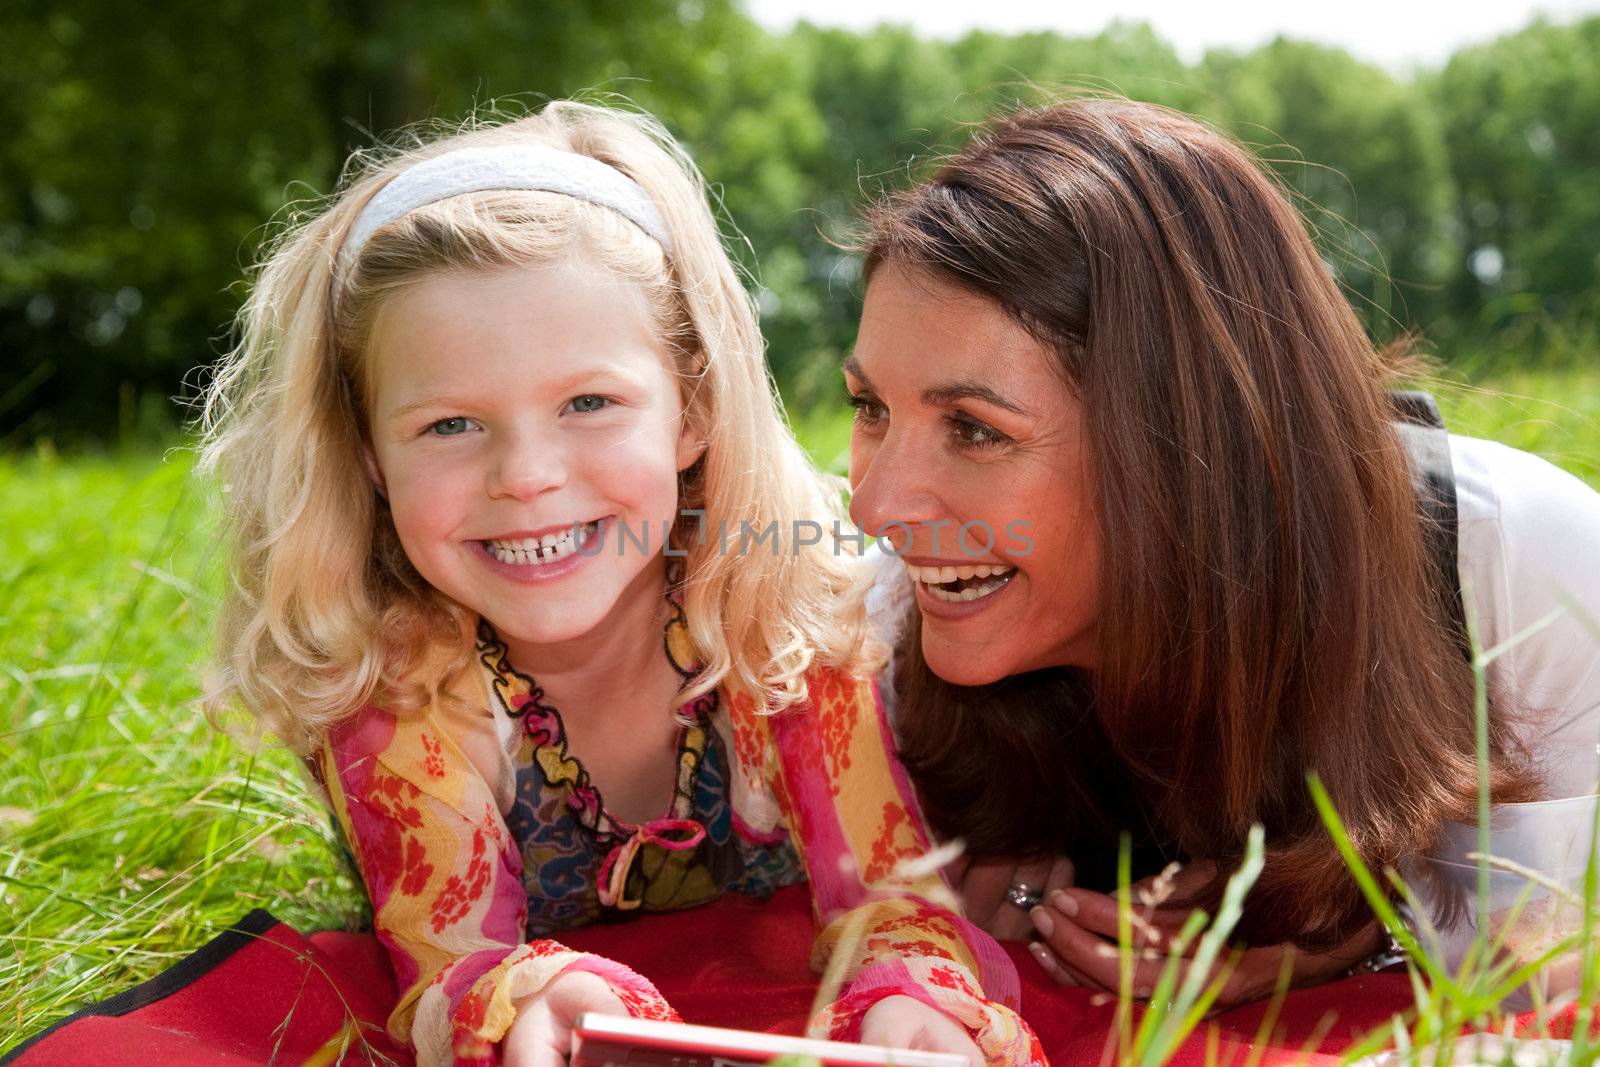 Mother and daughter outdoors together having fun and laughing